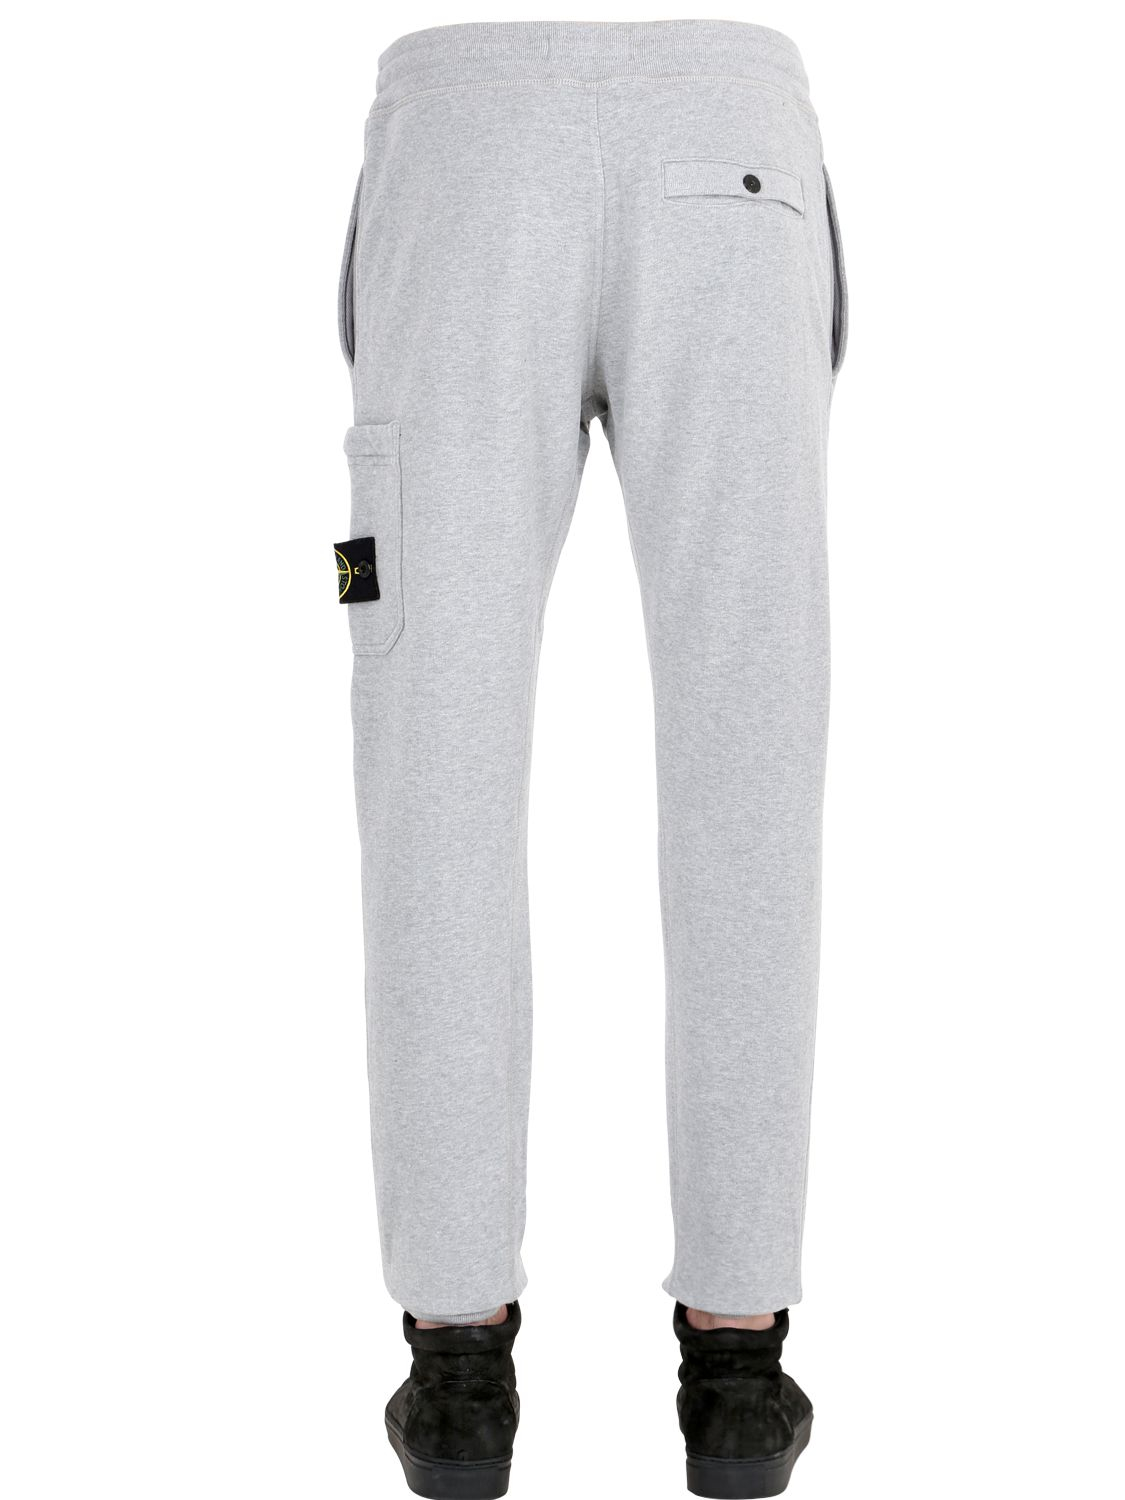 Stone Island Slim Fit Cotton Jogging Pants in Gray for Men - Lyst